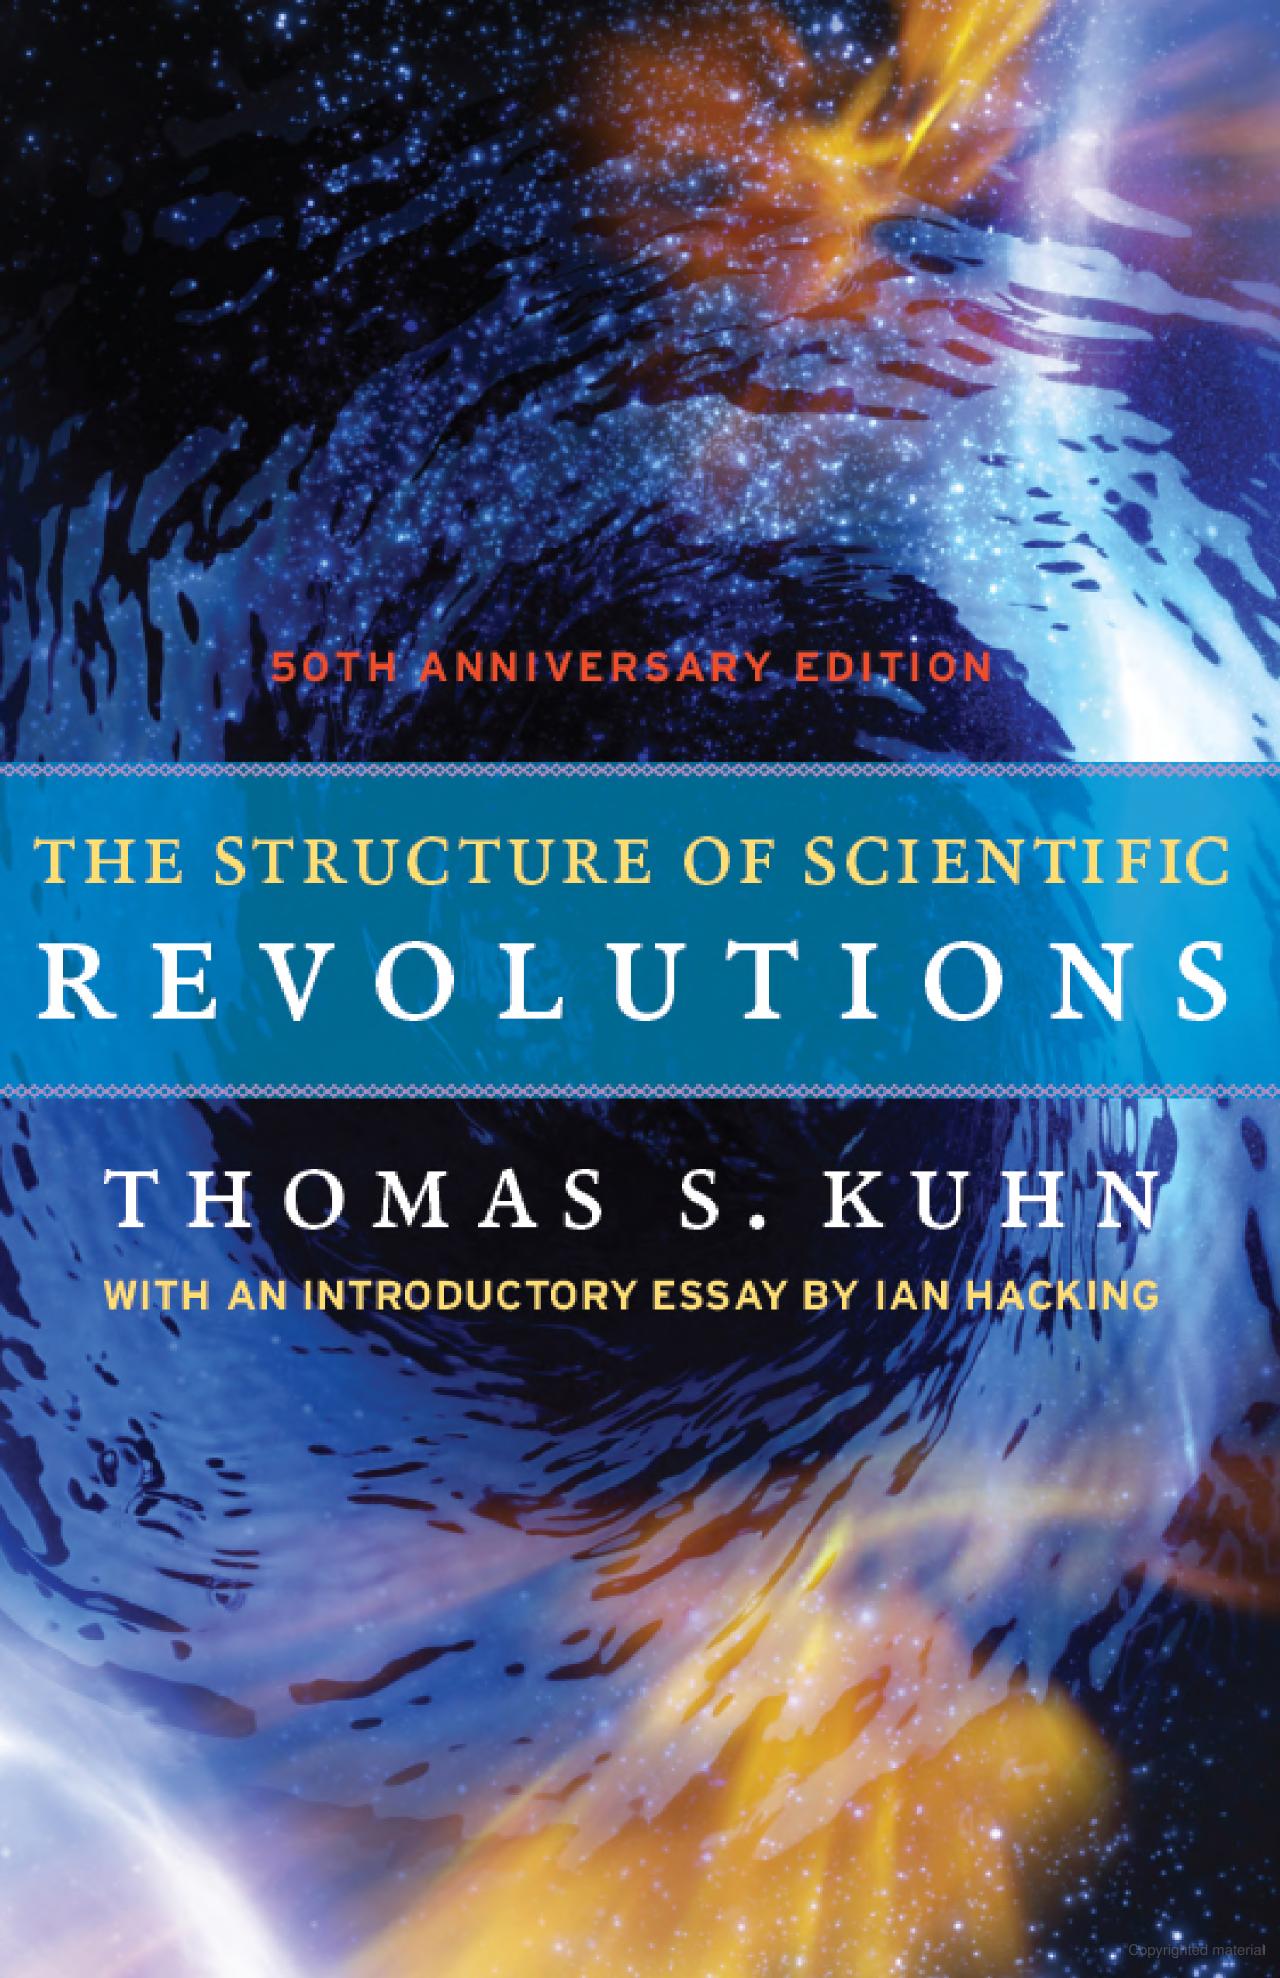 A book cover "The Structure of Scientific Revolutions" by Thomas S. Kuhn showing water in the background.